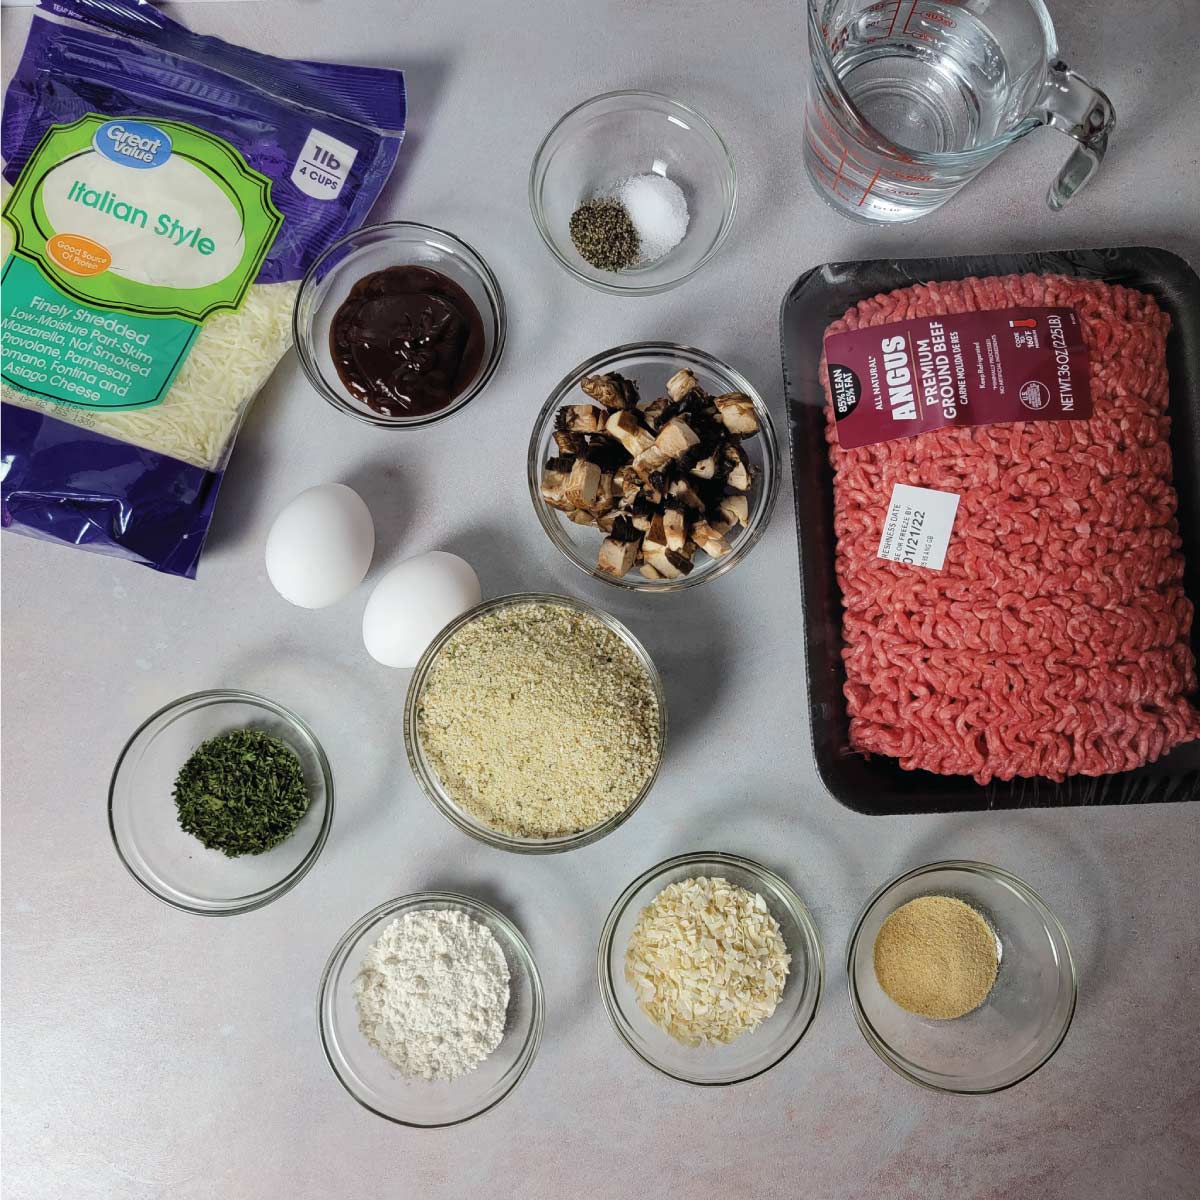 Ingredients prepped in bowls for making the meatloaf.